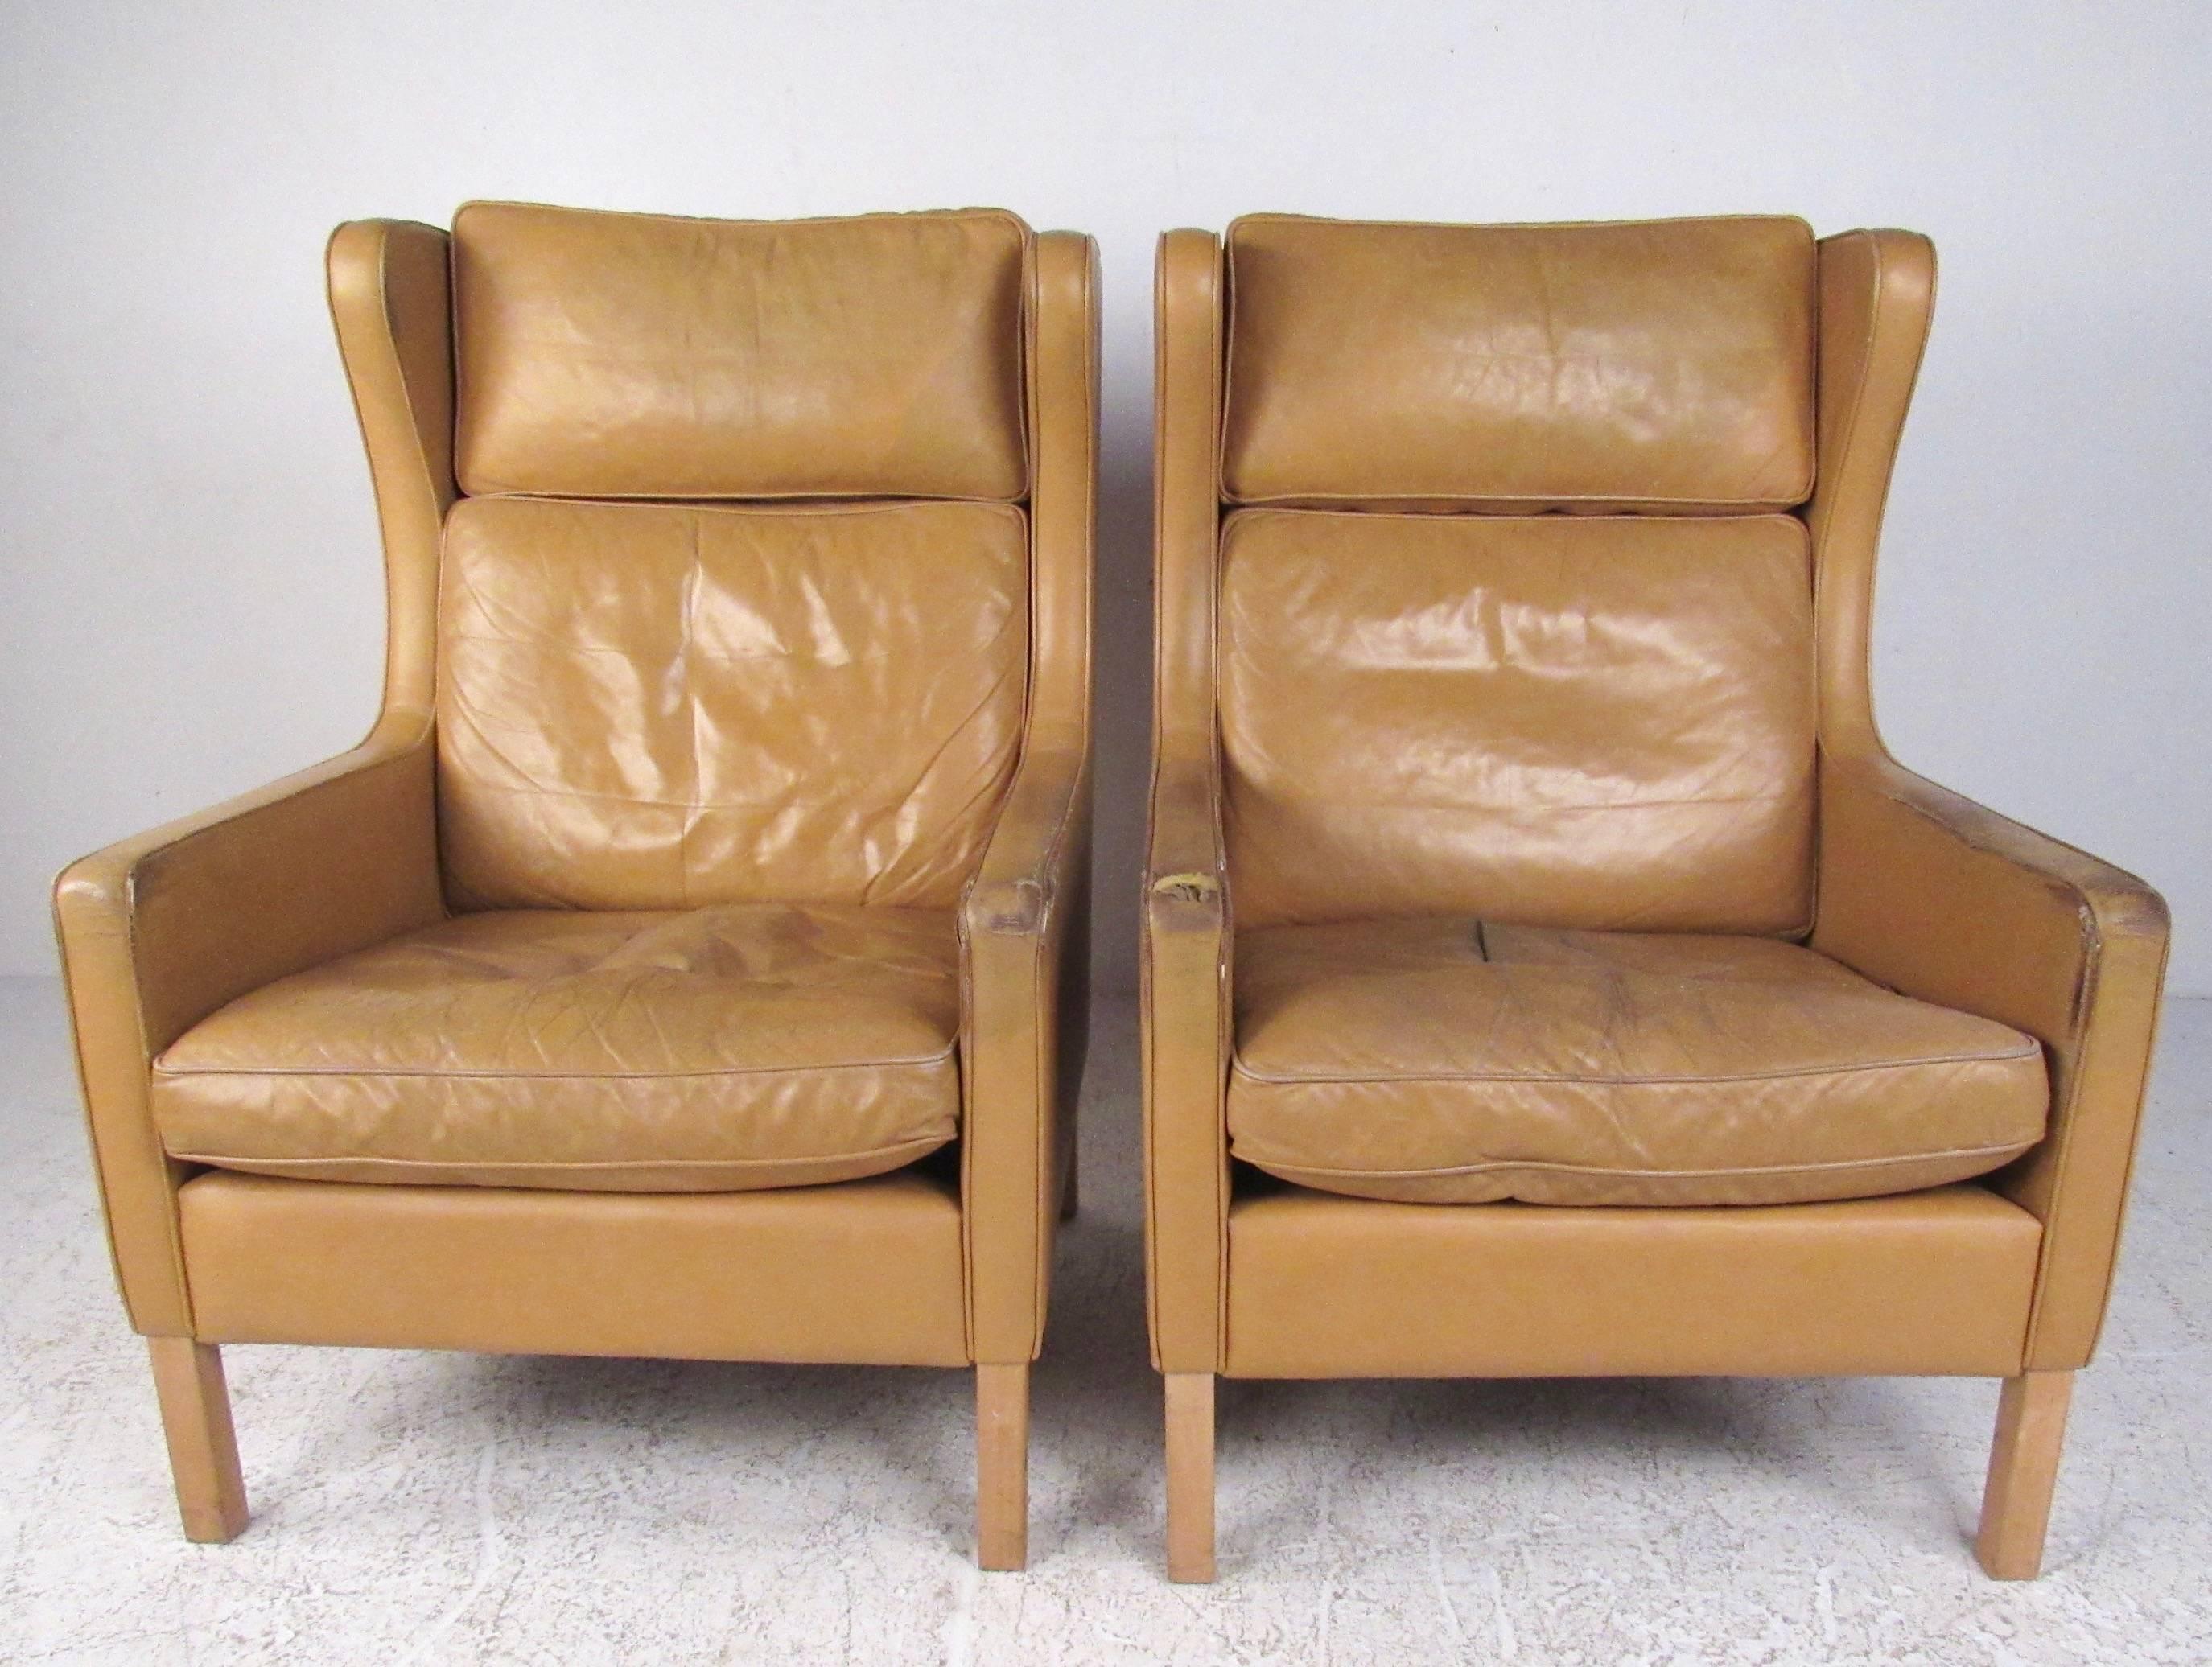 This pair of Børge Mogensen wingback lounge chairs for stouby come paired with matching ottomans. Vintage leather upholstery is worn, but this statuesque pair of Scandinavian Modern lounge chairs make an impressive addition to any seating